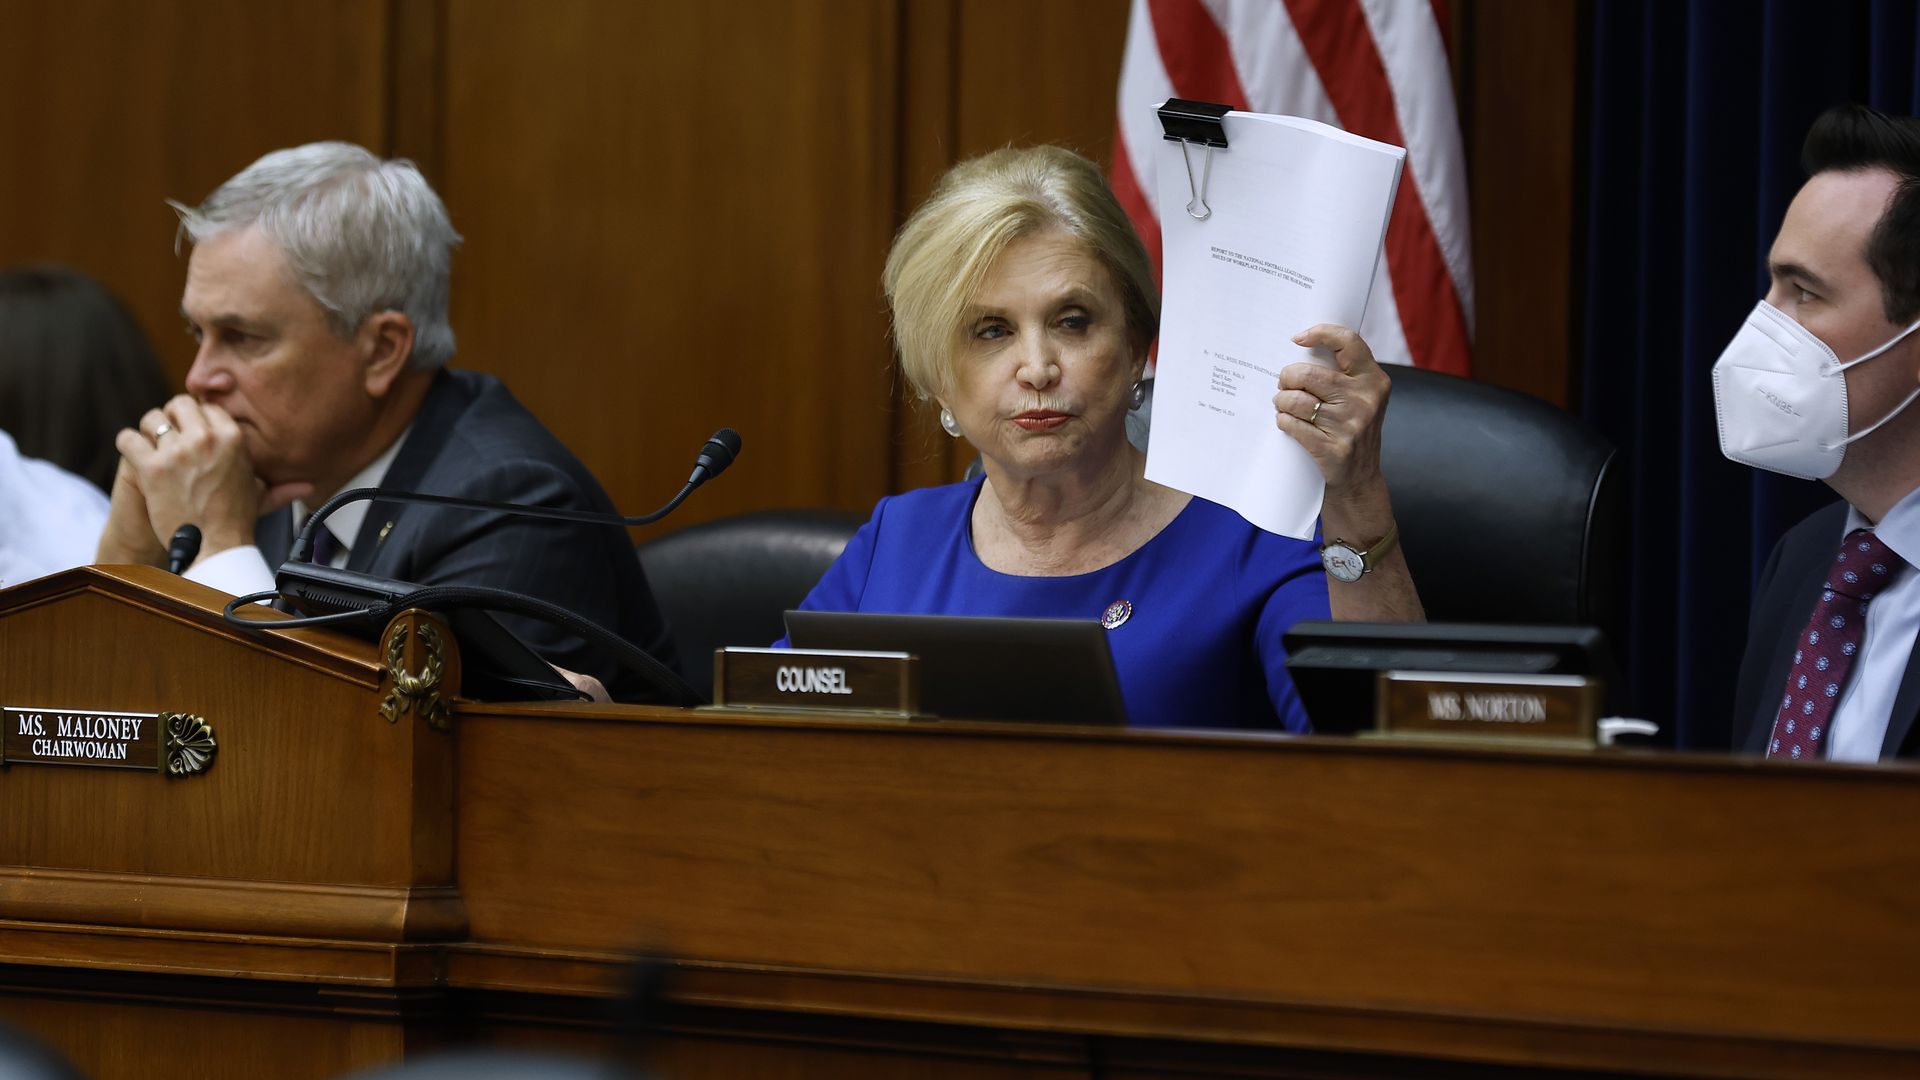 Rep. Carolyn Maloney holds up a report at a House Oversight Committee hearing